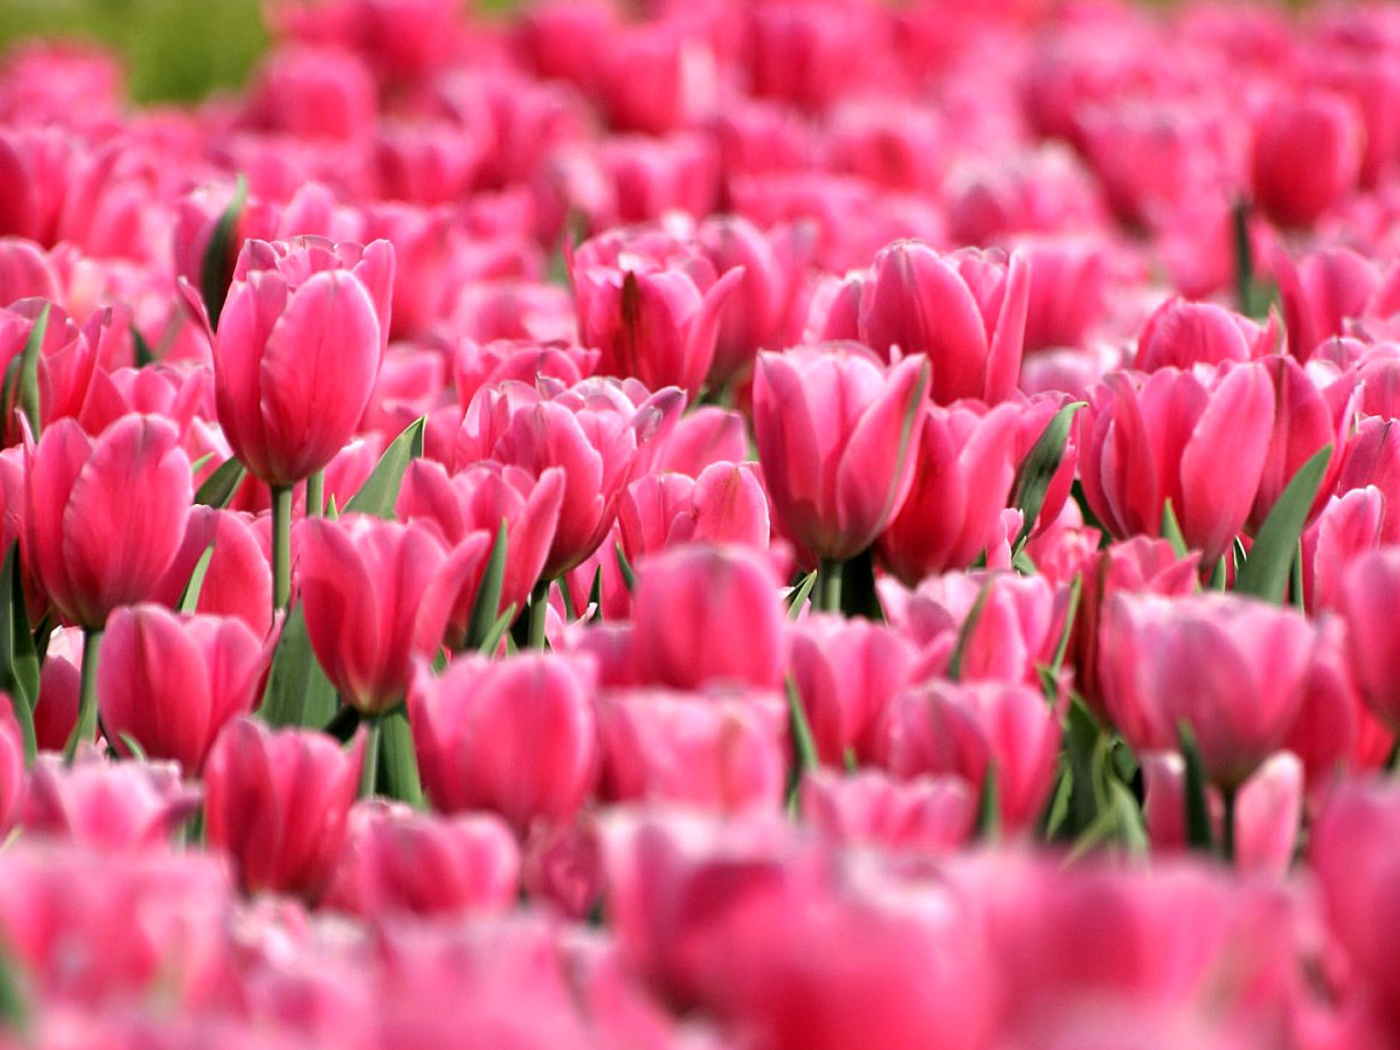 Pink Tulips in Holland Festival screenshot #1 1400x1050